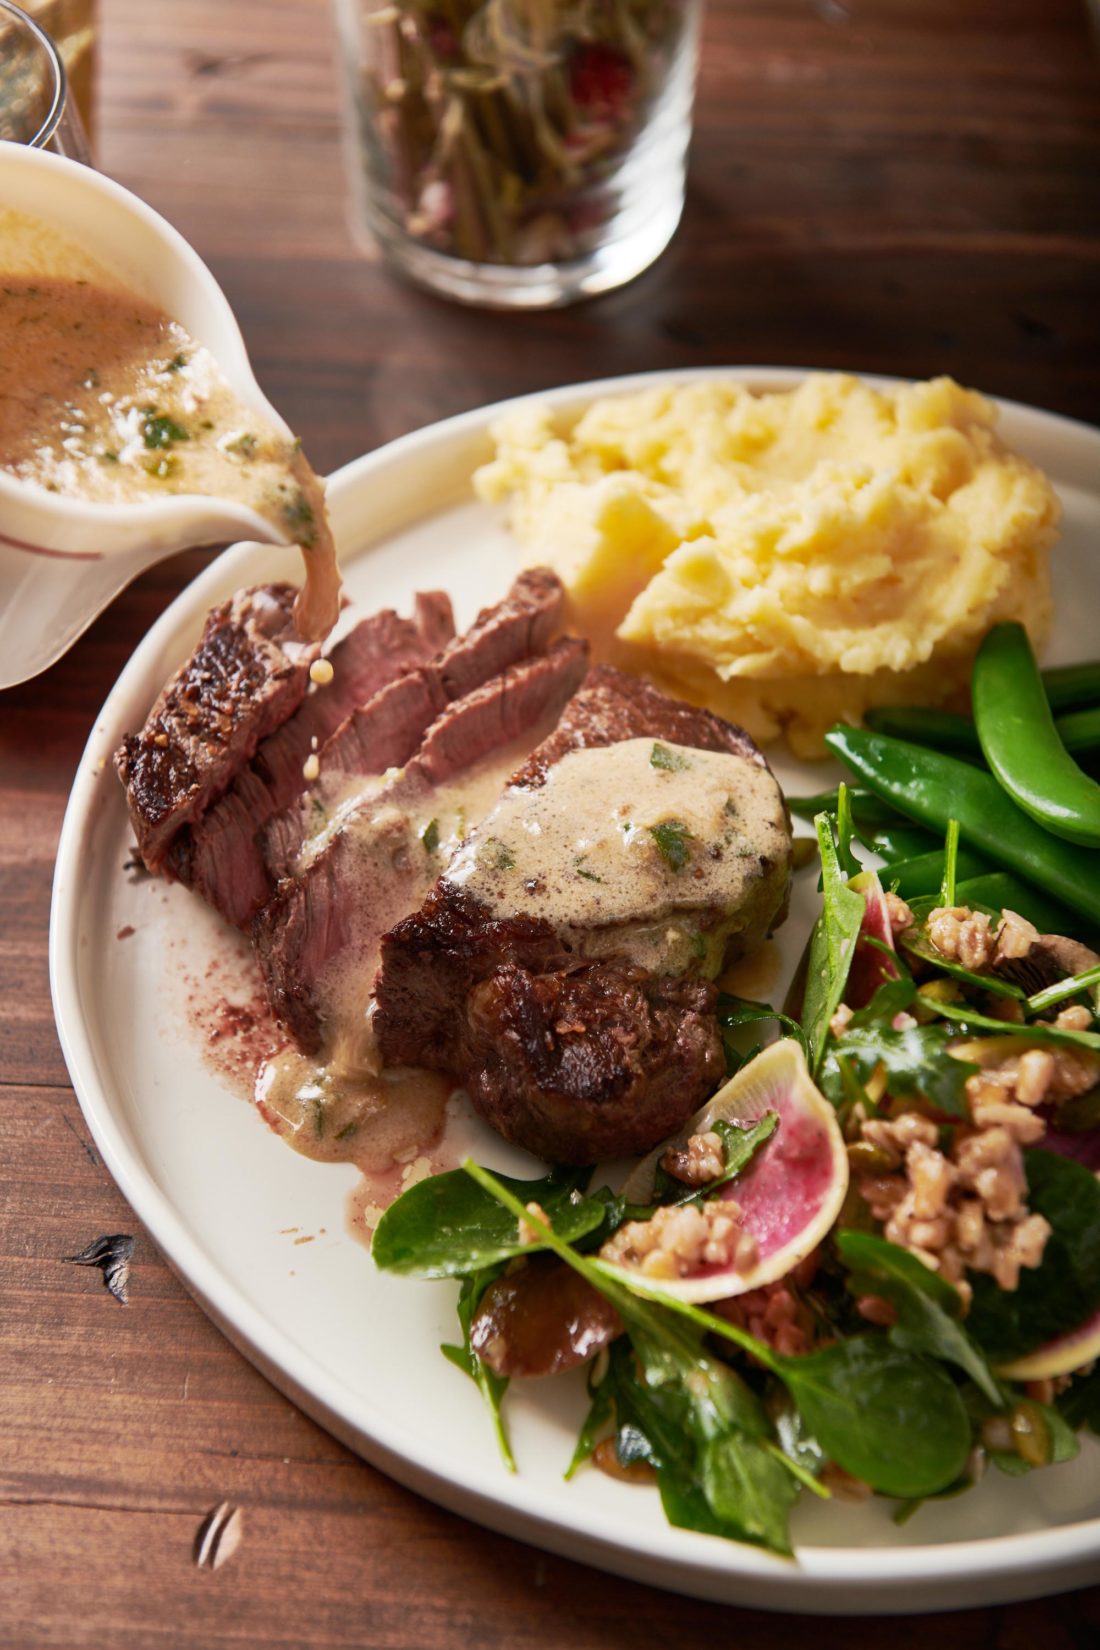 Creamy Parmesan Mustard Sauce pouring over a plate of sliced filet mignon.